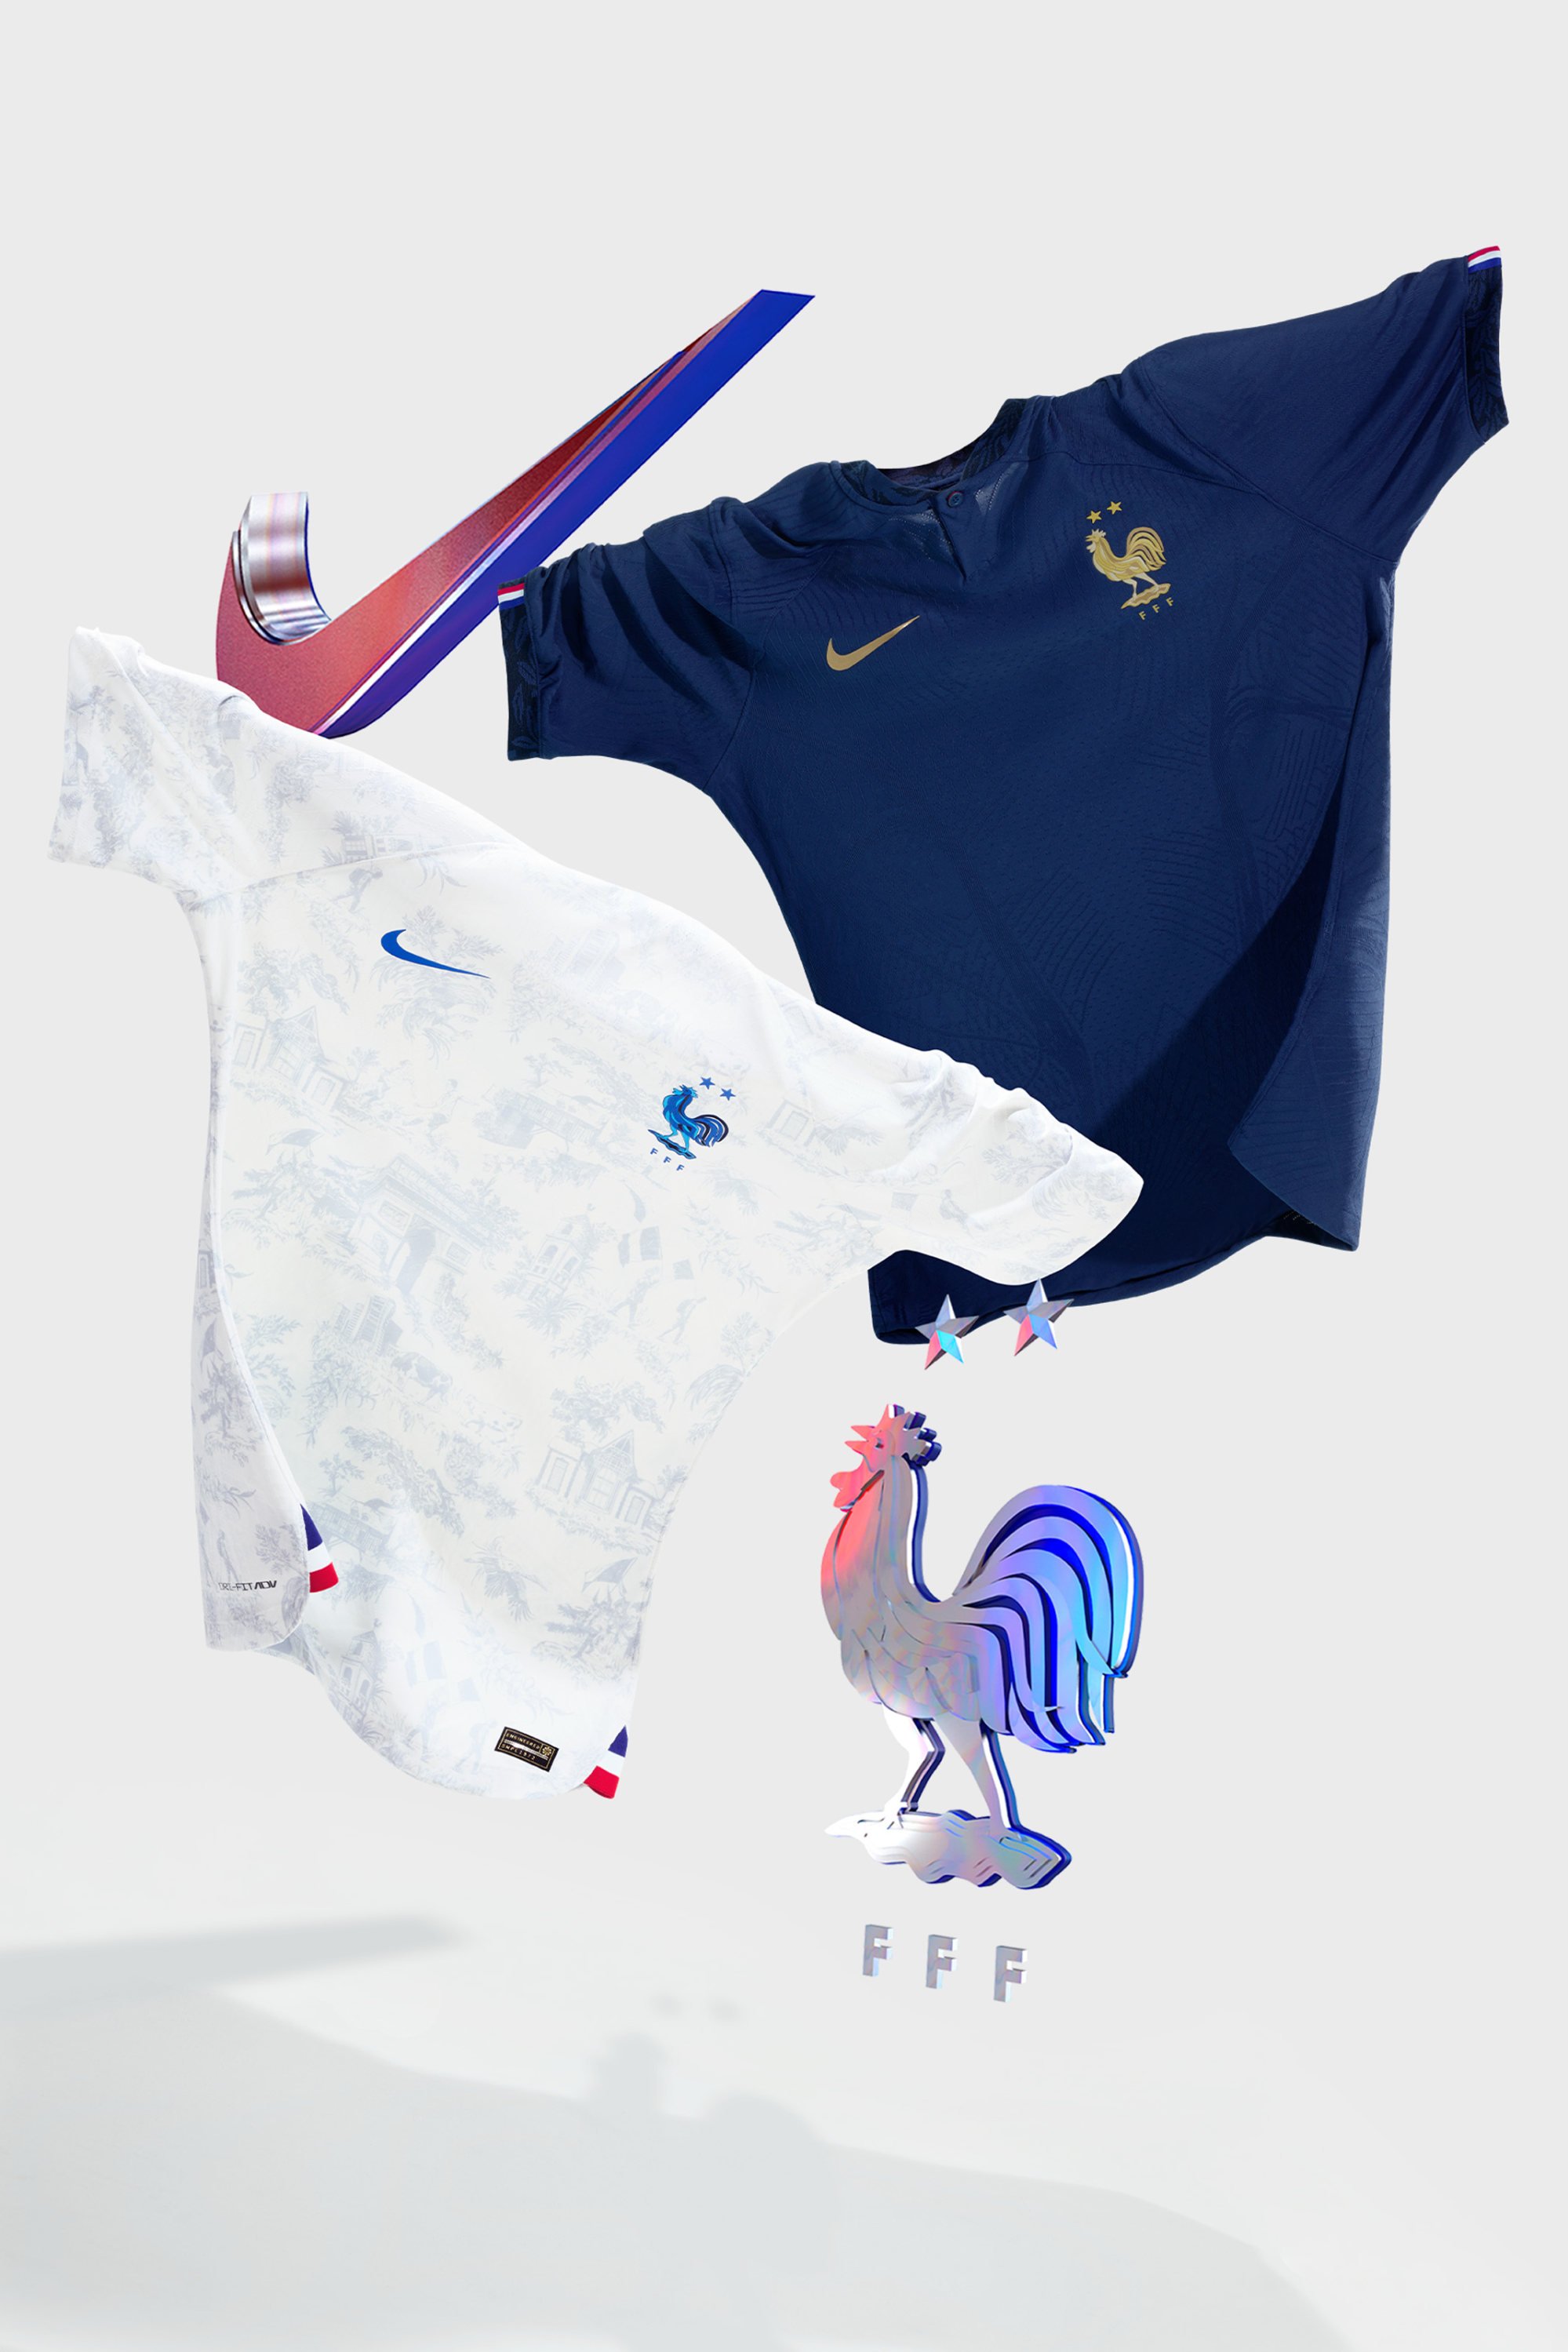 These 2022 World Cup Kits Bring Cherry Blossoms and Sakuramochi to